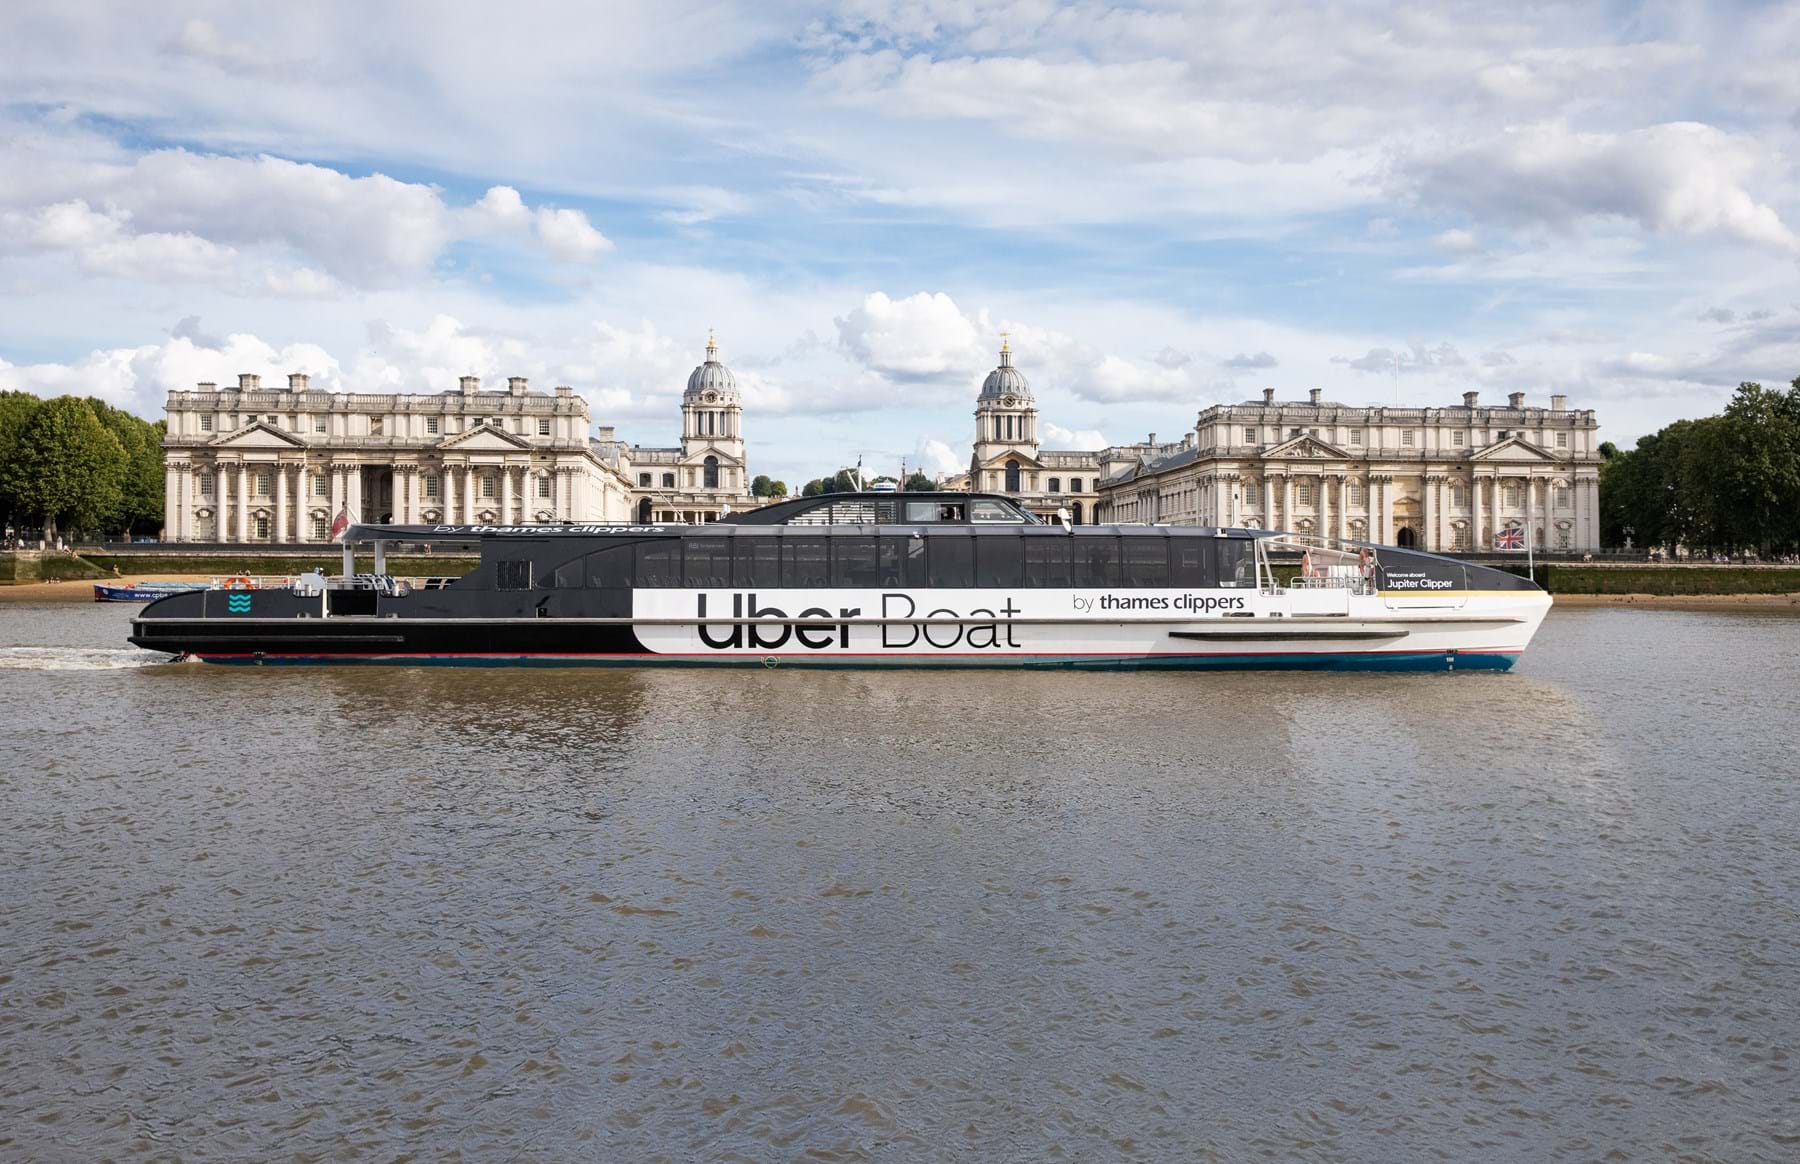 Uber Boat By Thames Clippers ORNC HERO ONLY